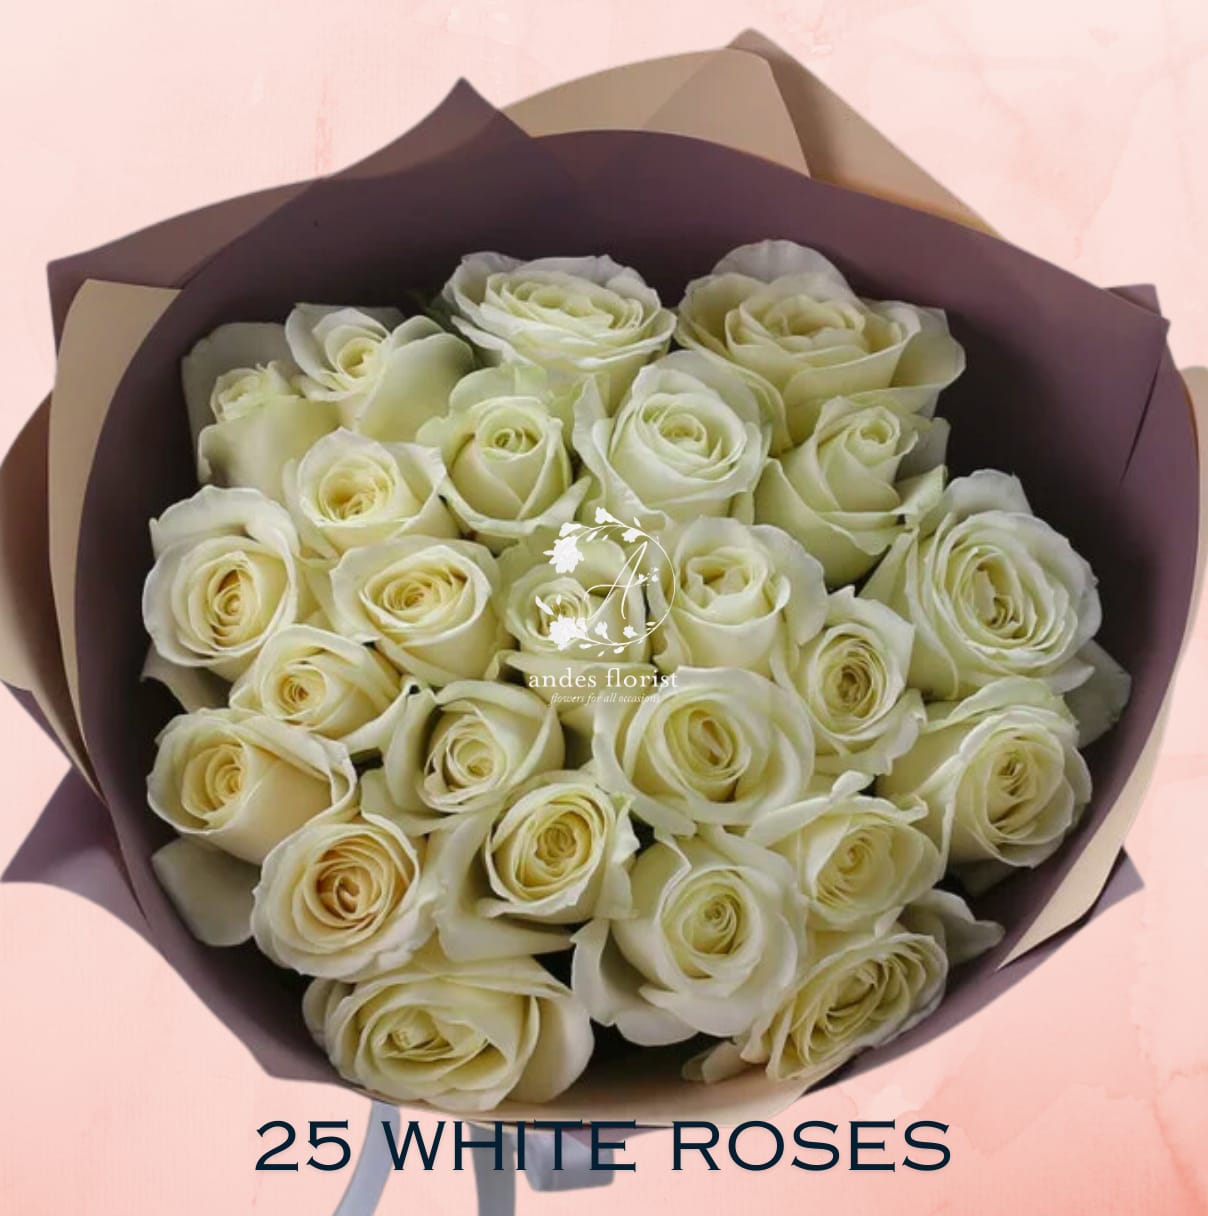 Grand Wrap - White Roses - Standard: 25 Roses Deluxe: 50 Roses Premium: 100 Roses  Wrap Paper is subject to change based on availability. 